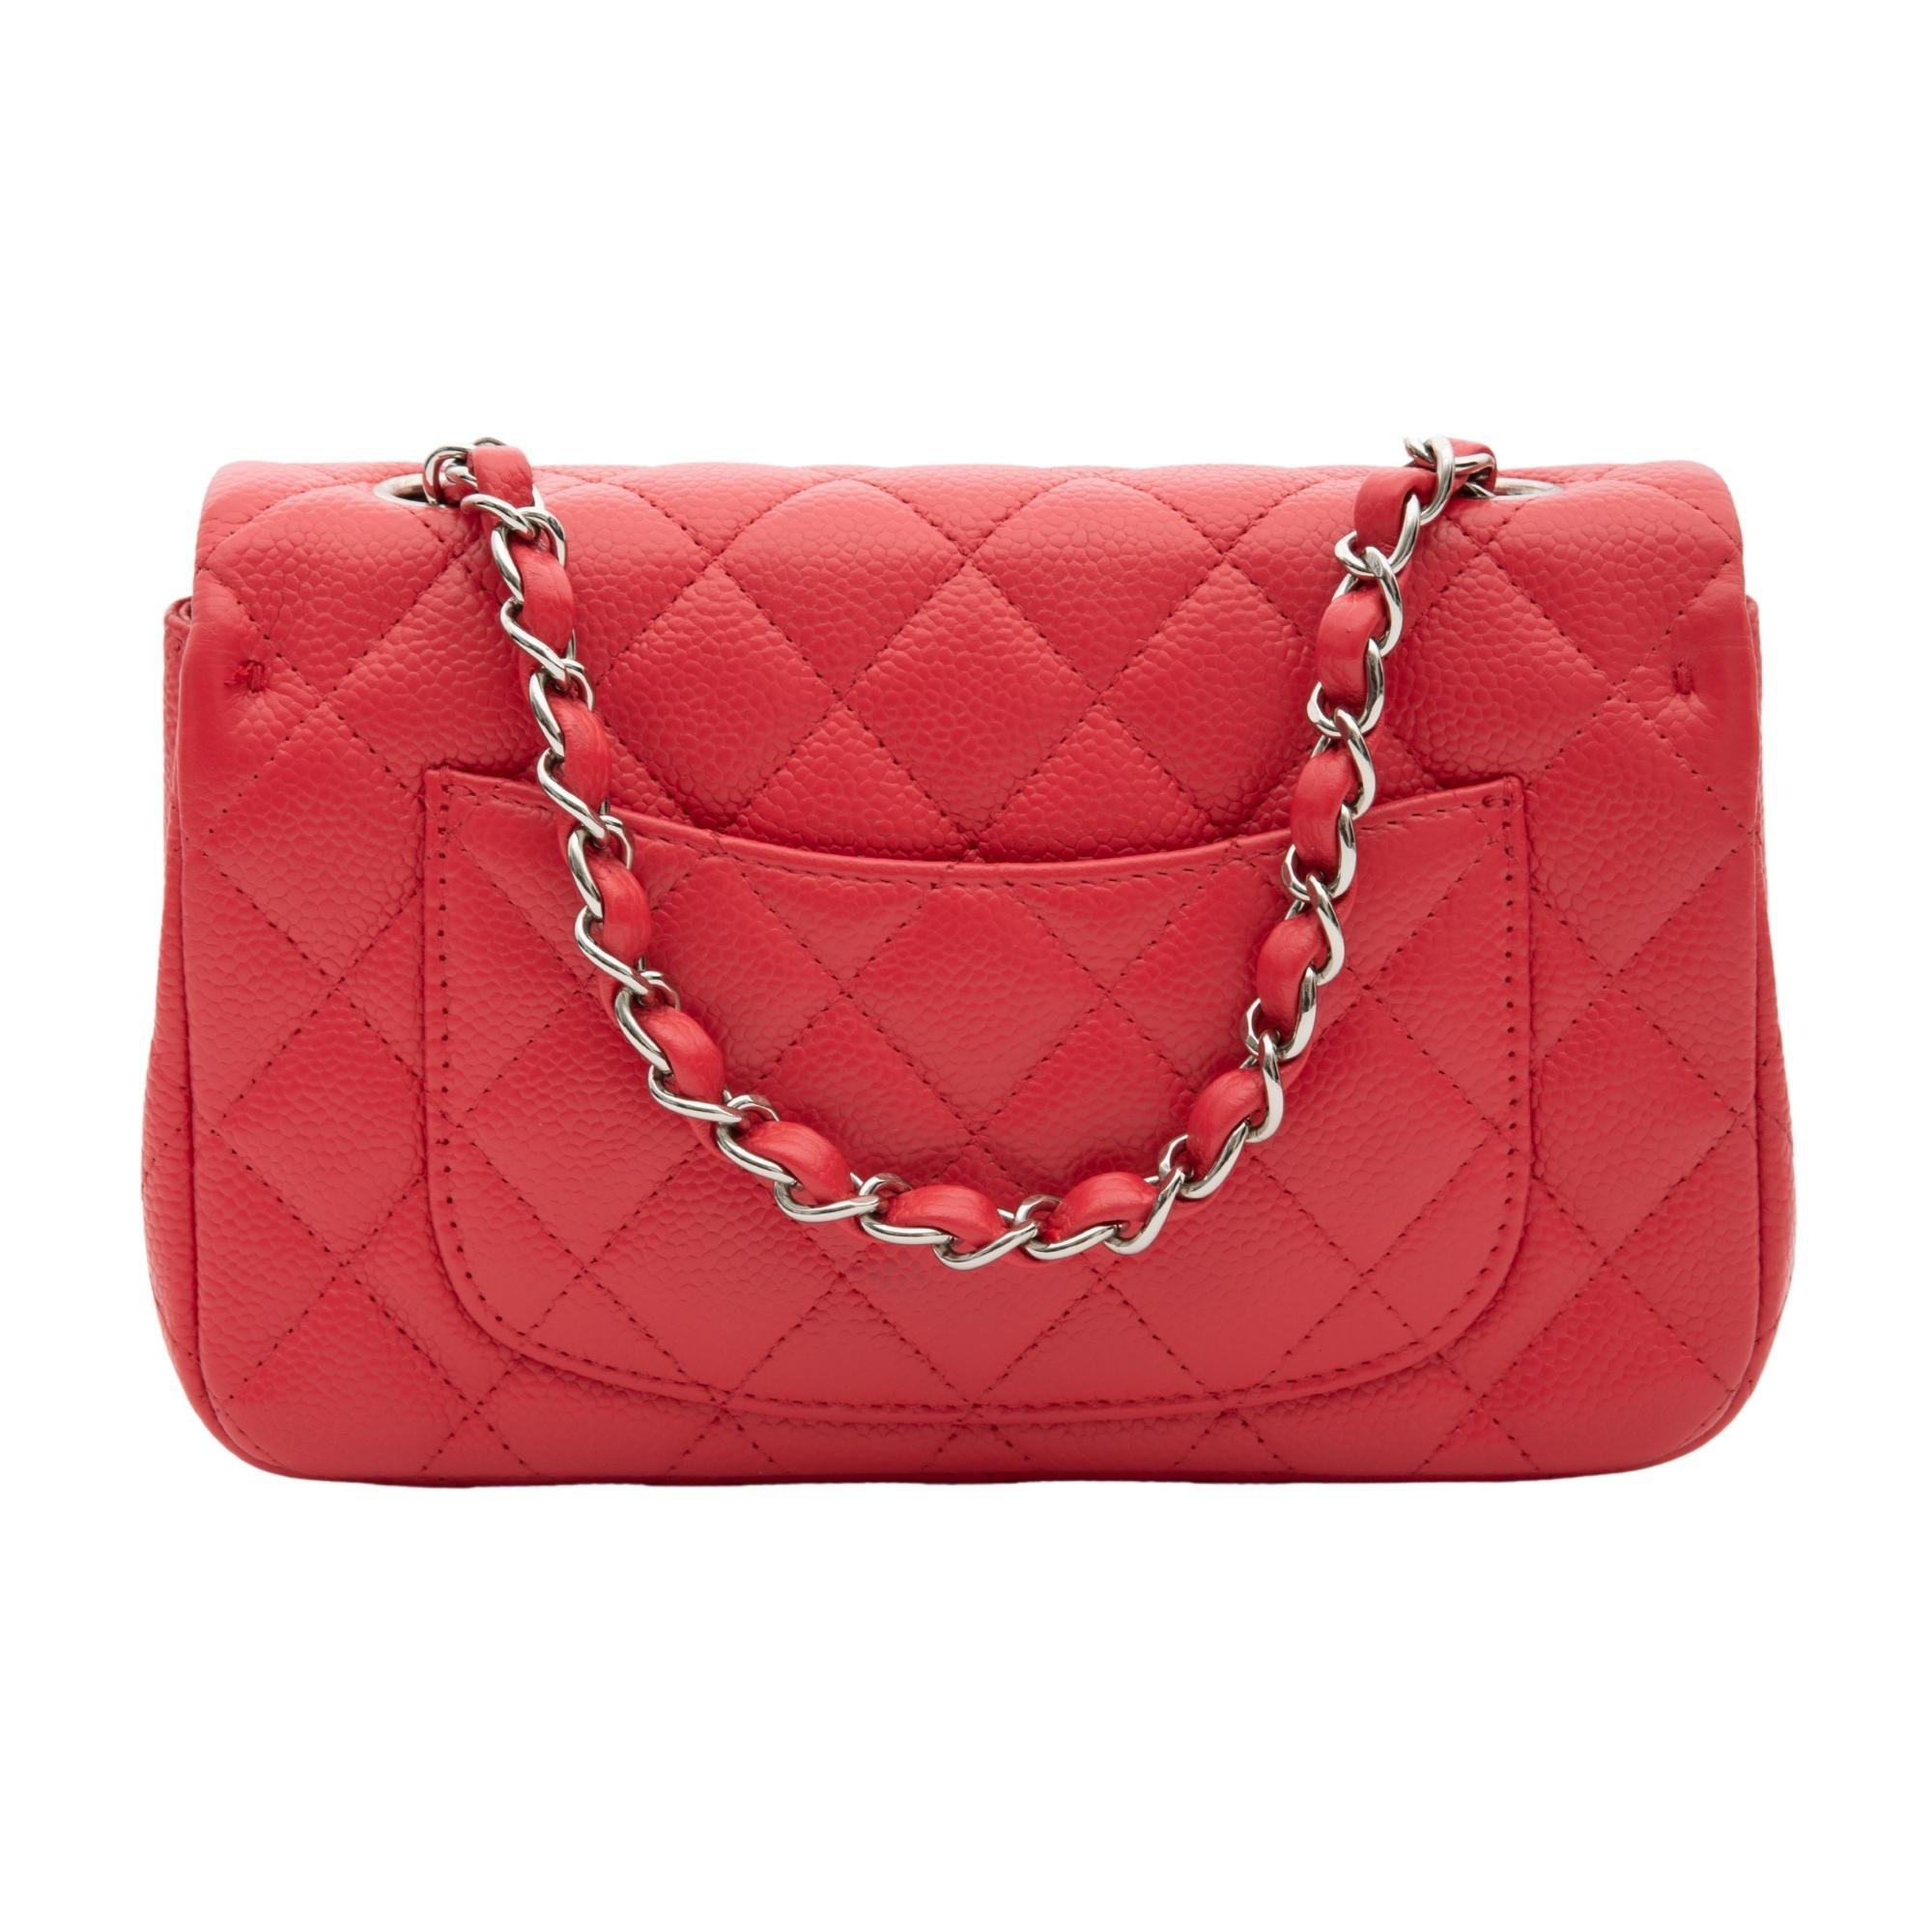 This rectangular classic mini flap mag is made with caviar leather in pink. The bag features two top holes for the shoulder straps (verse traditional four holes), sliver tone chain interlaced with leather shoulder strap, interlocking CC twist lock